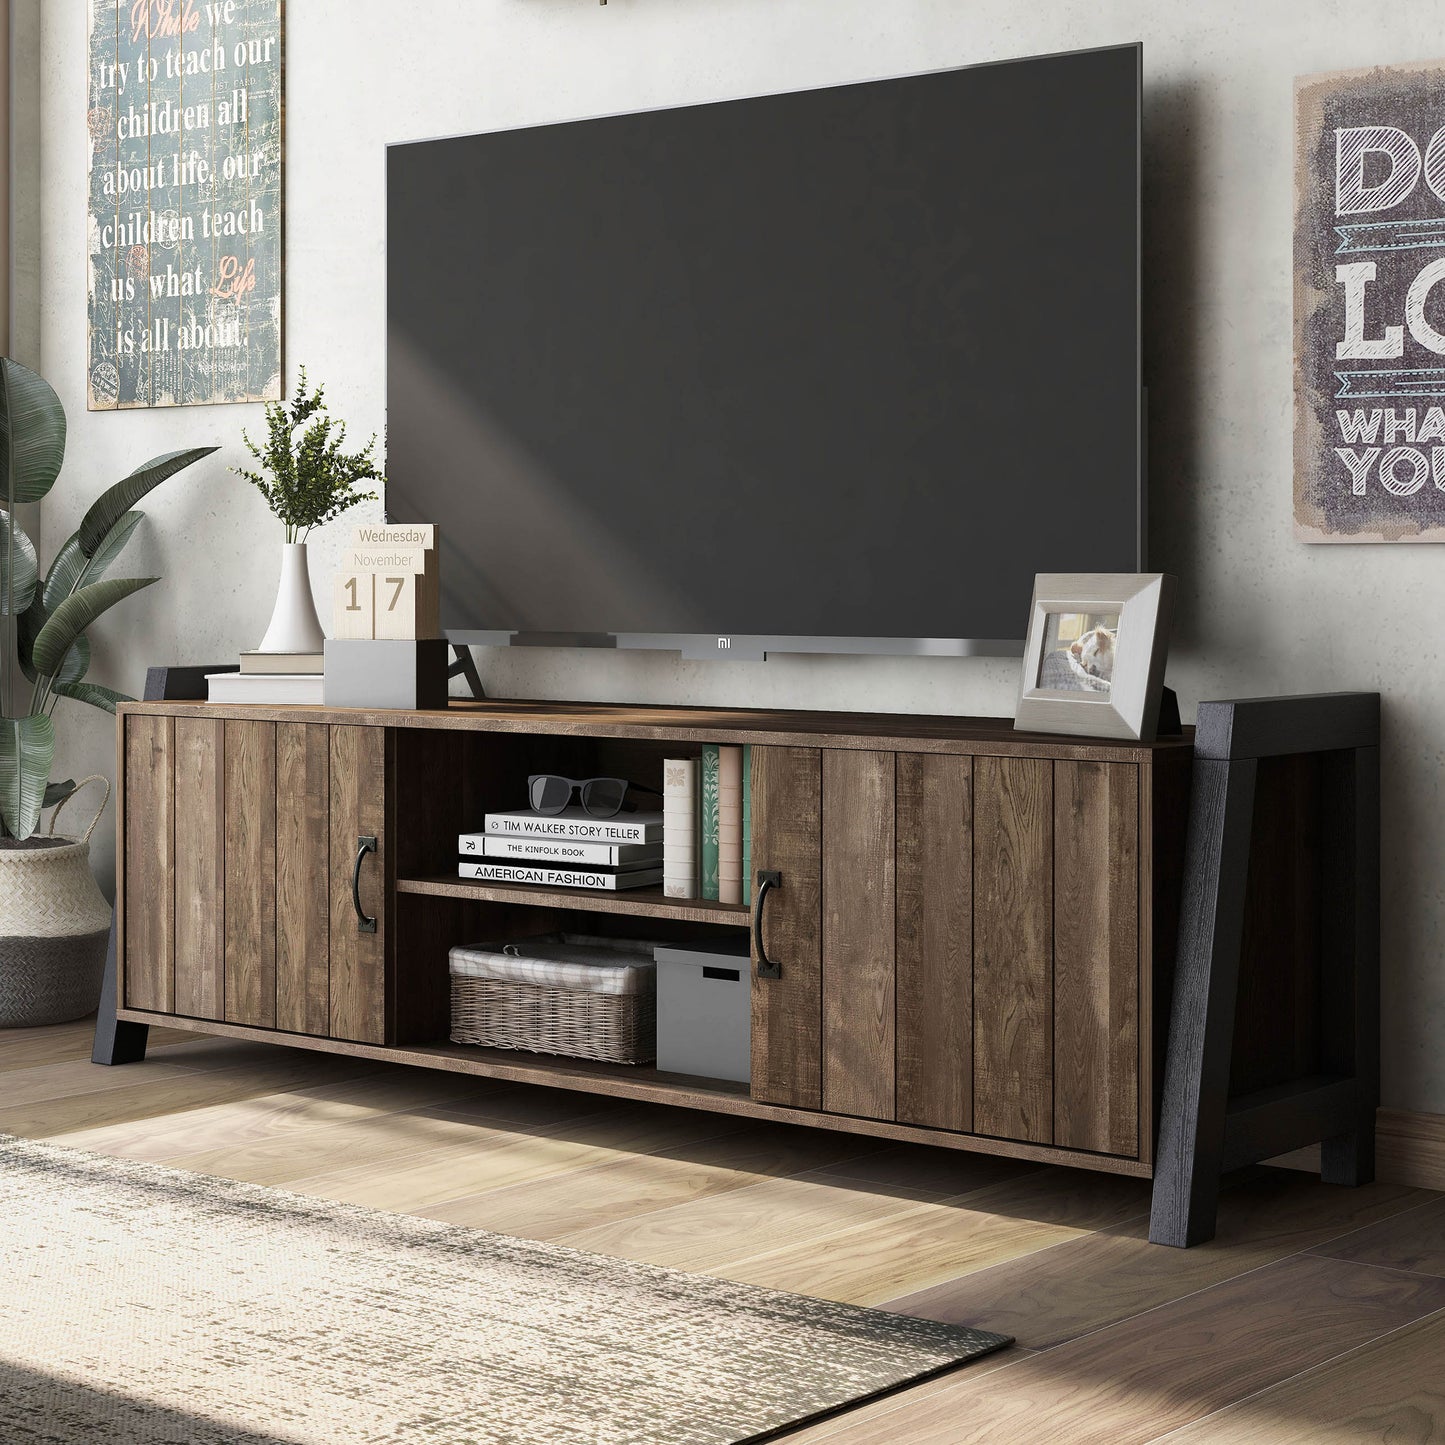 Left angled farmhouse reclaimed oak and black six-shelf TV stand in a living room with accessories